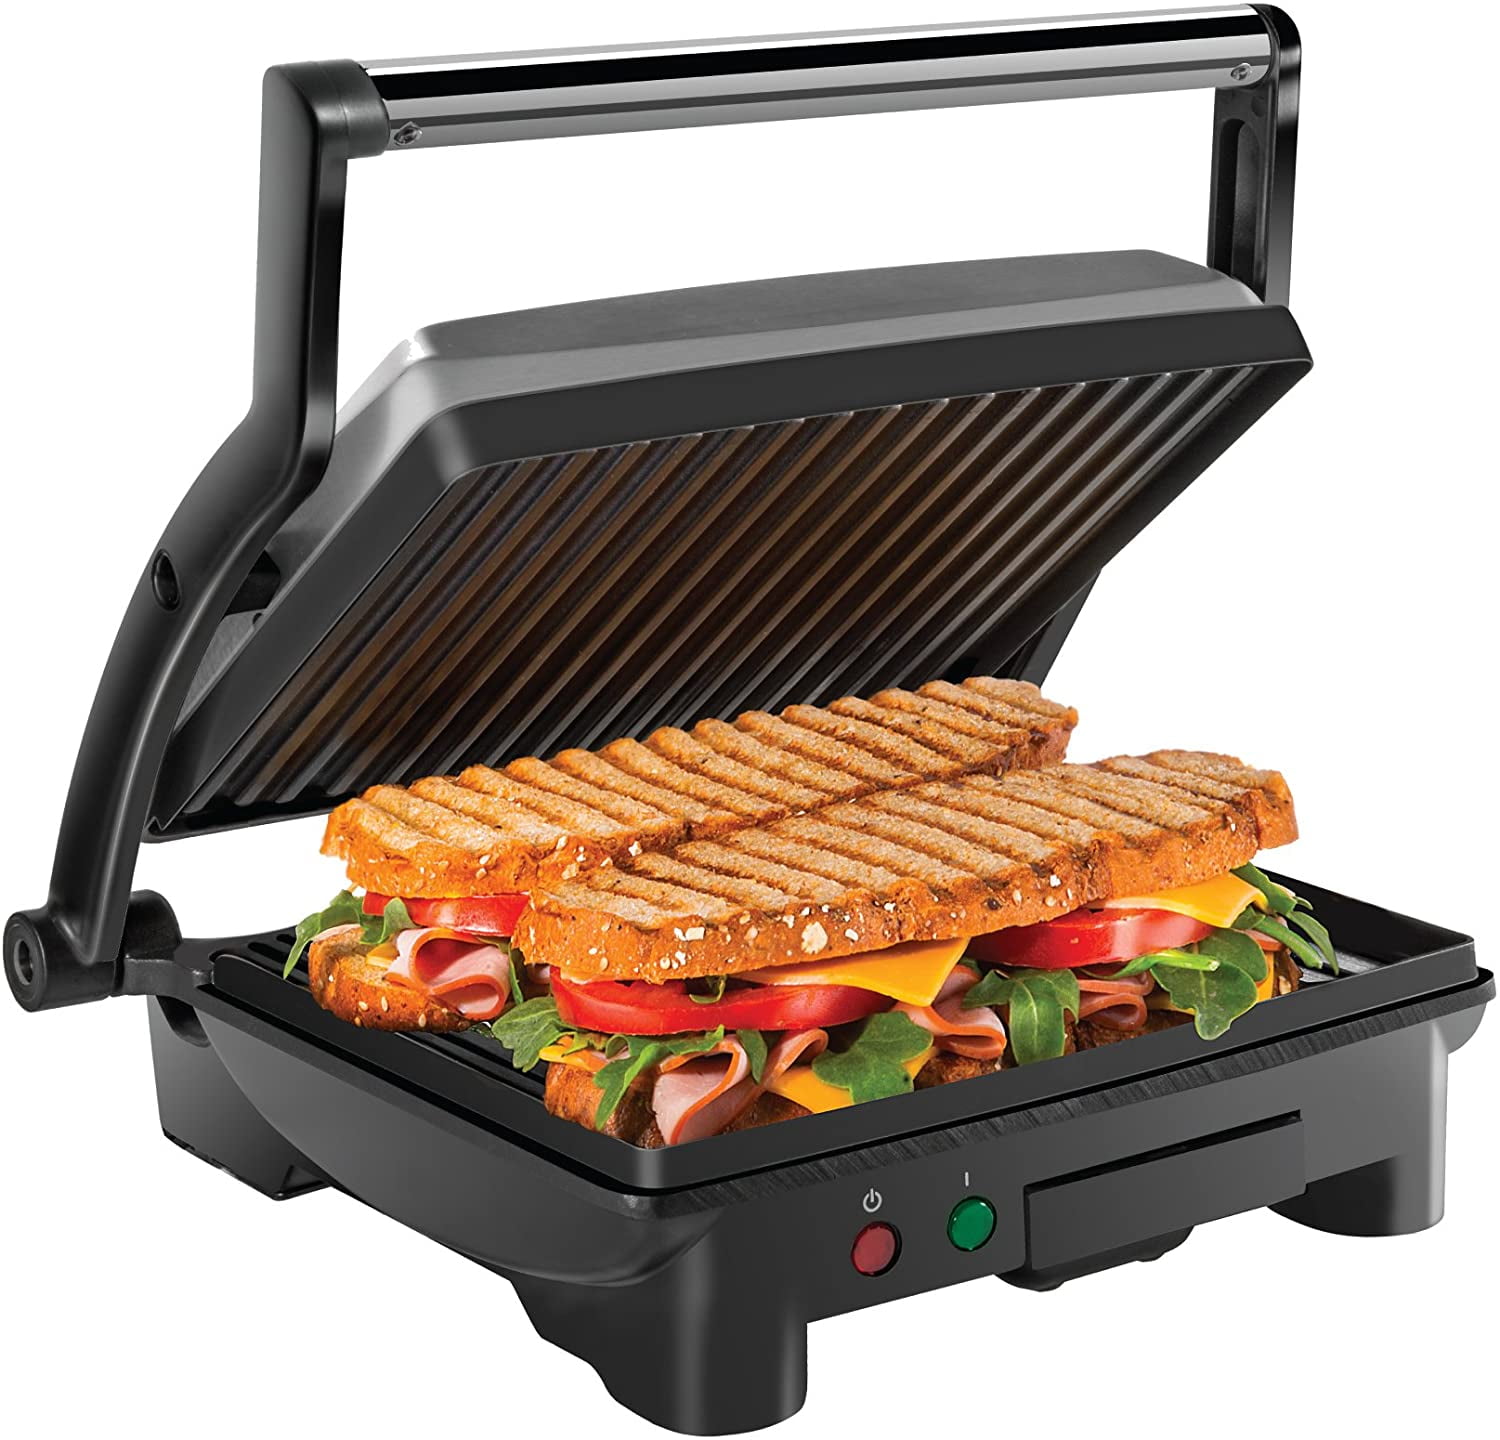 Flat Non-Stick 4-Slice - Press Grill Electric for 3-in-1 Press, Chefman Grill, Stainless Panini & Opens Steel, New